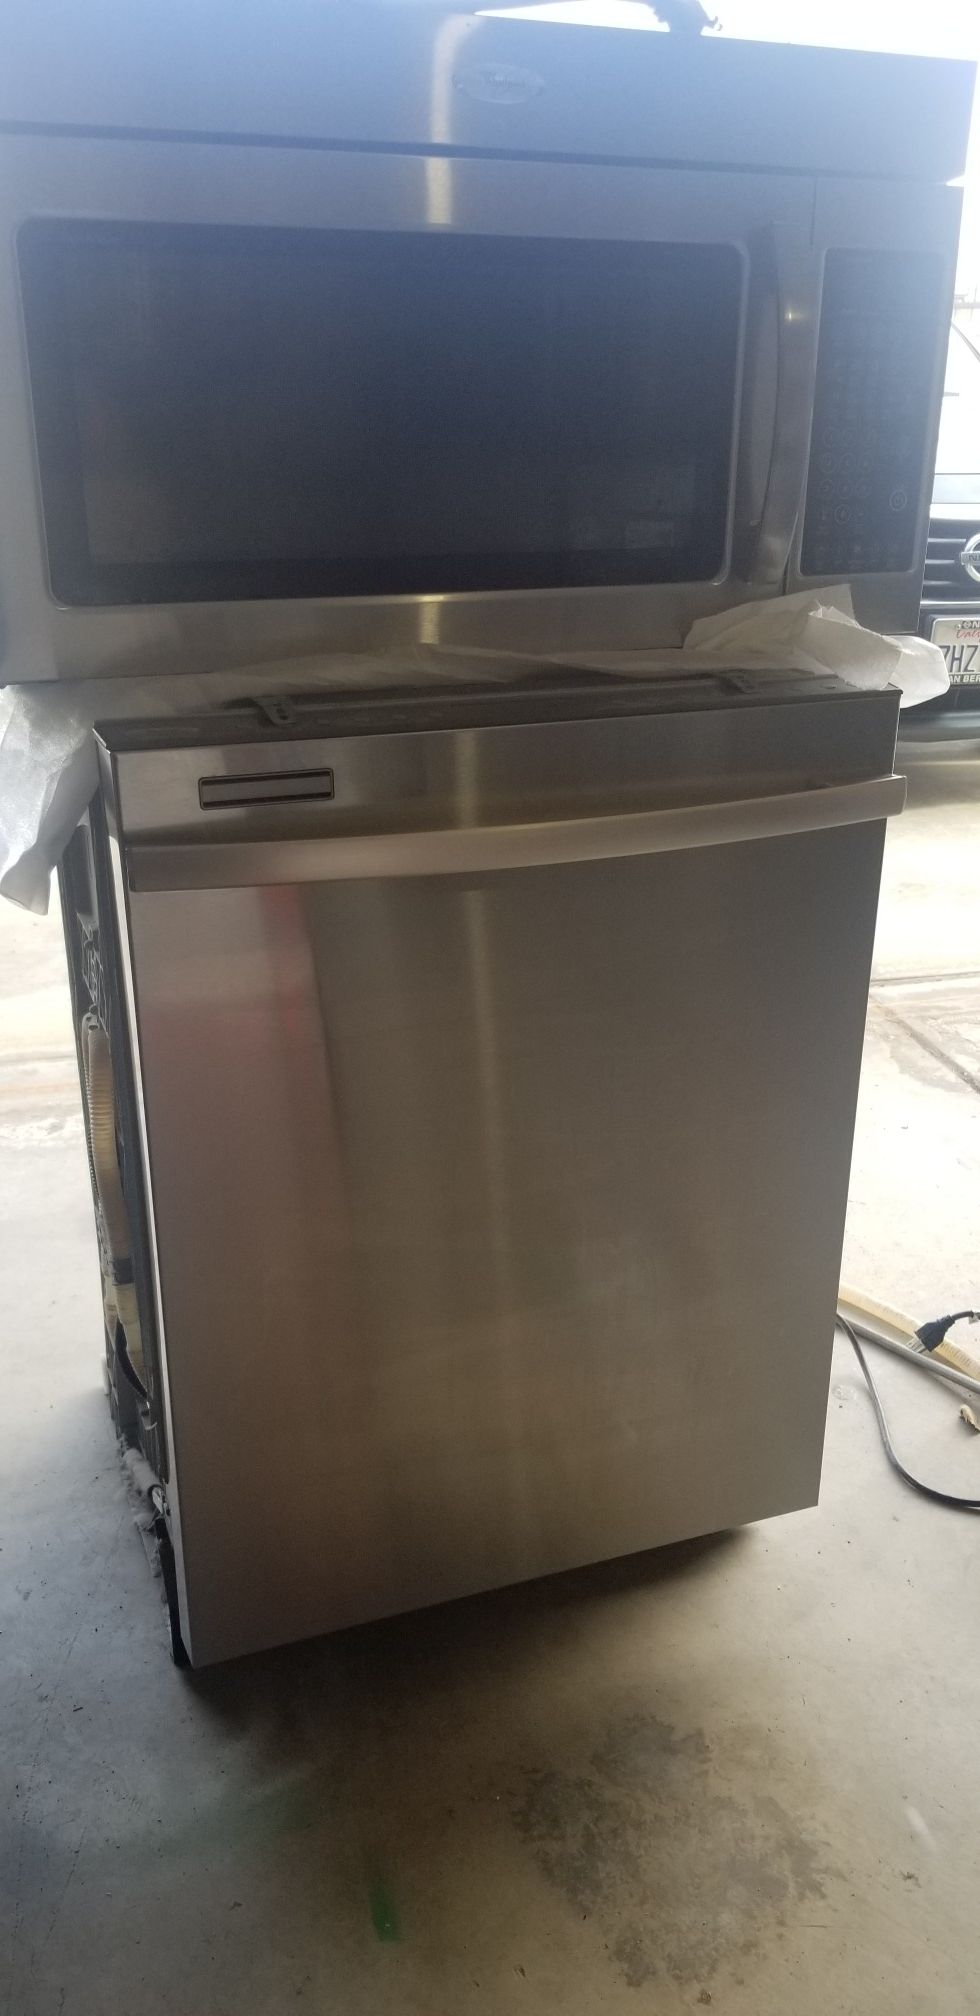 Dish washer and over range microwave